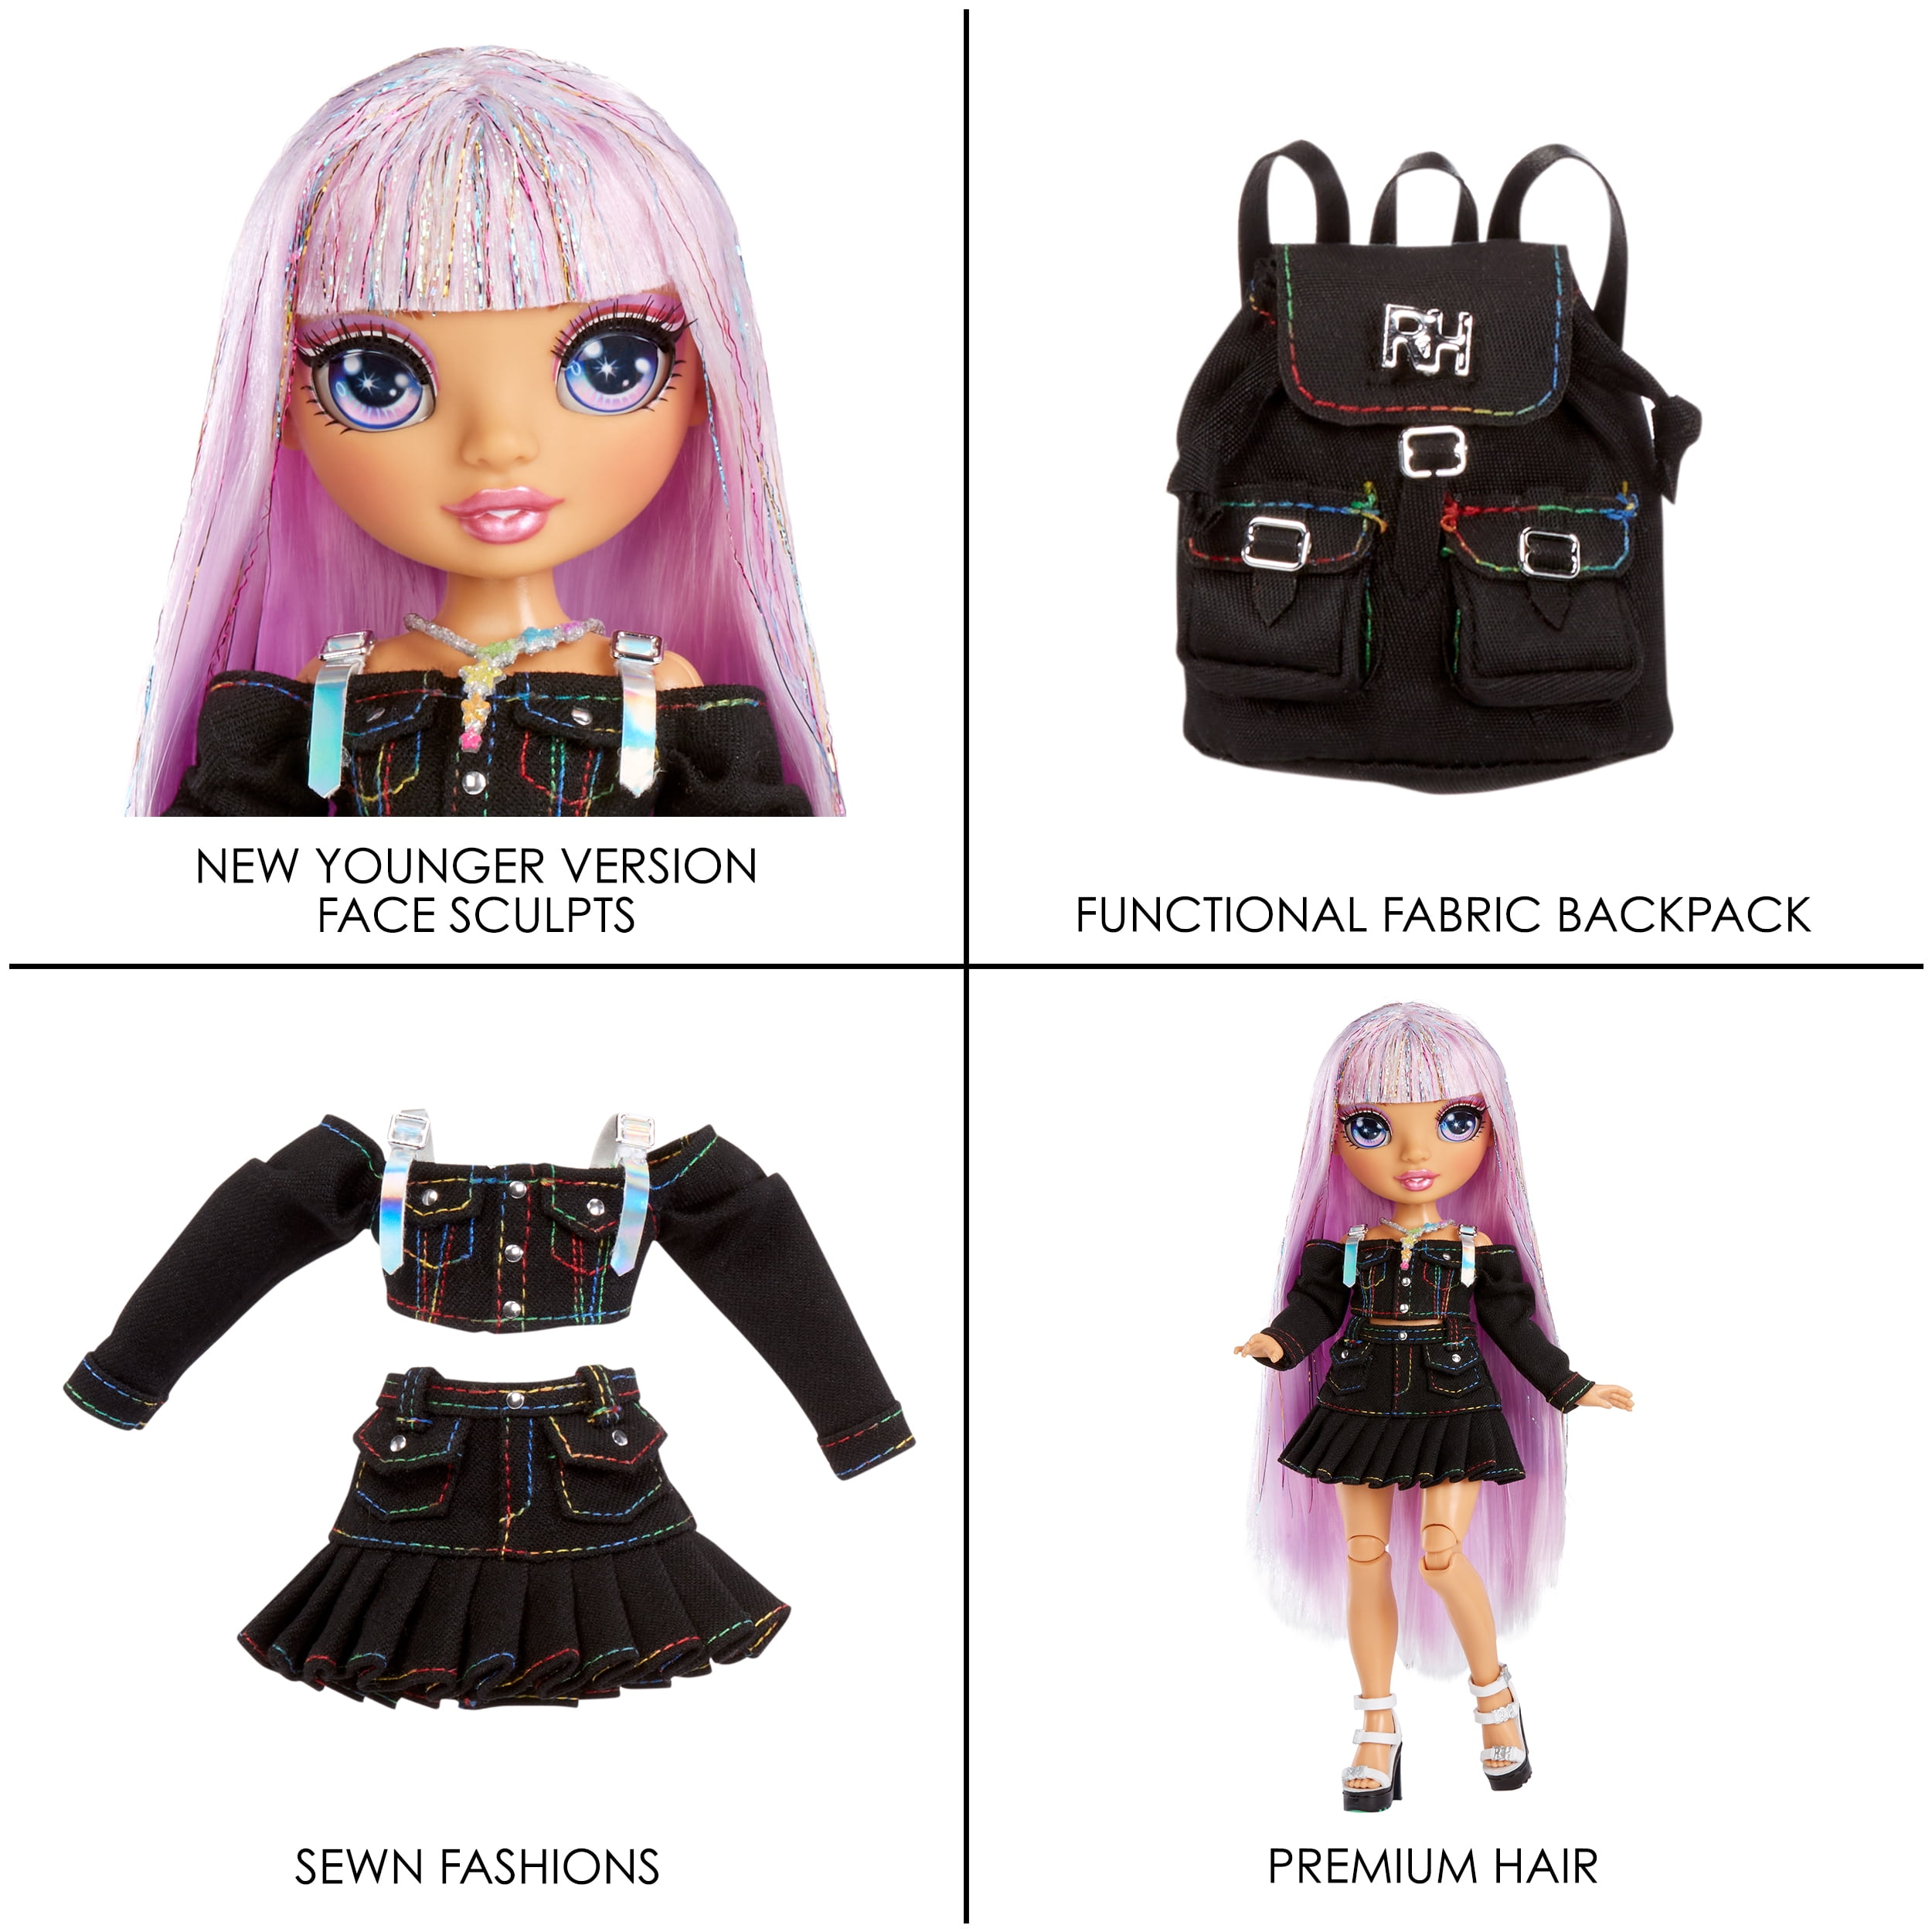 Rainbow High Fashion Studio with Avery Styles Fashion Doll Playset Includes  Designer Outfits & 2 Sparkly Wigs for 300+ Looks, Gifts for Kids 